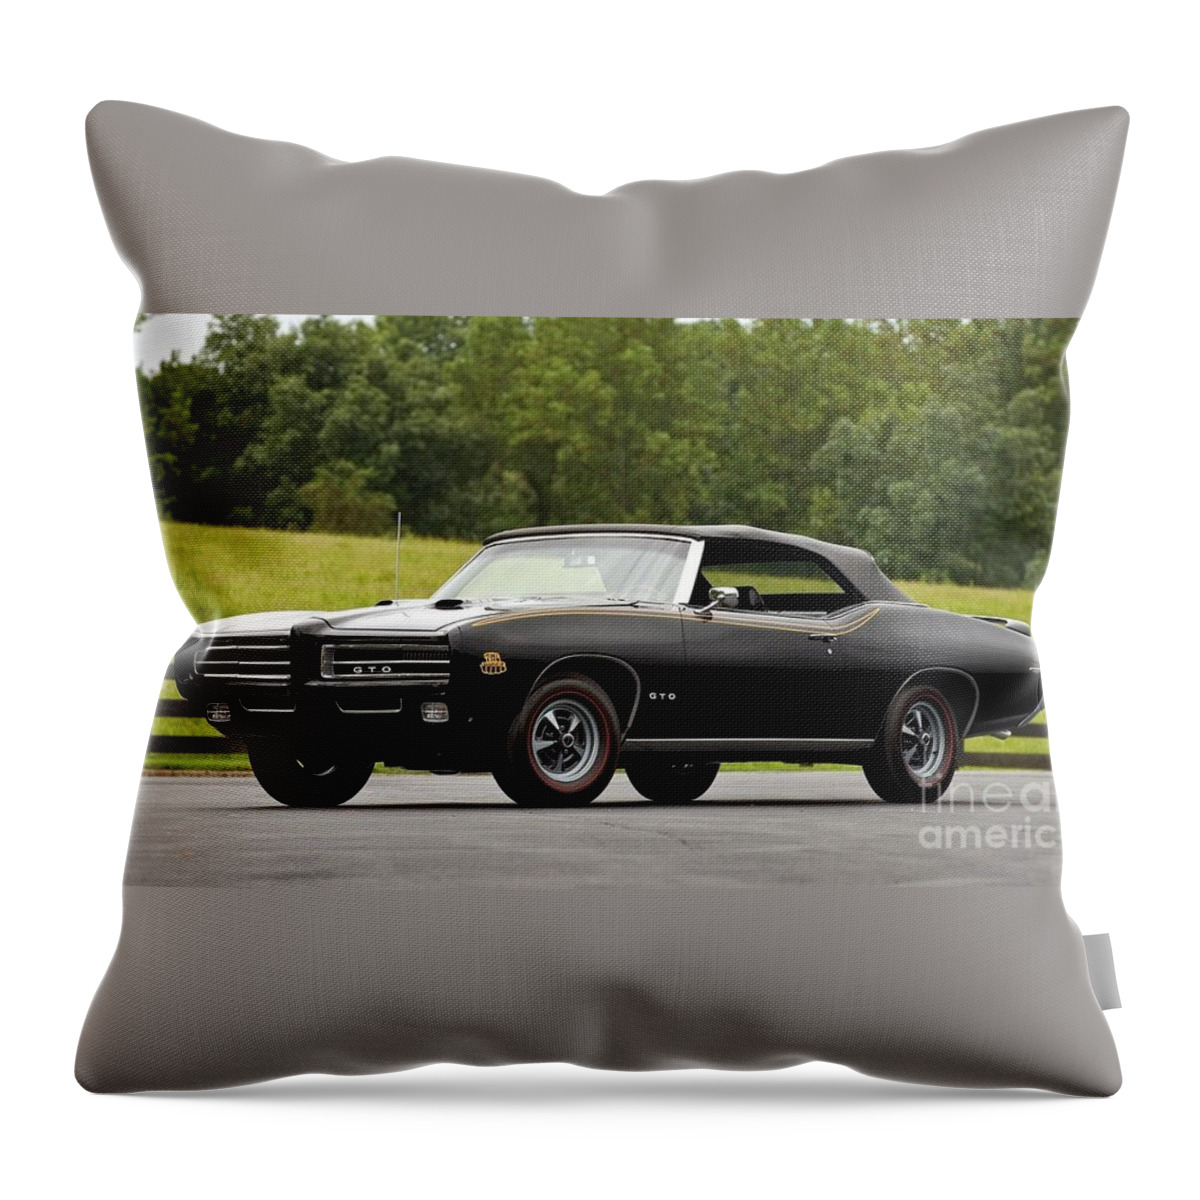 Pontiac Throw Pillow featuring the photograph Pontiac GTO by Action